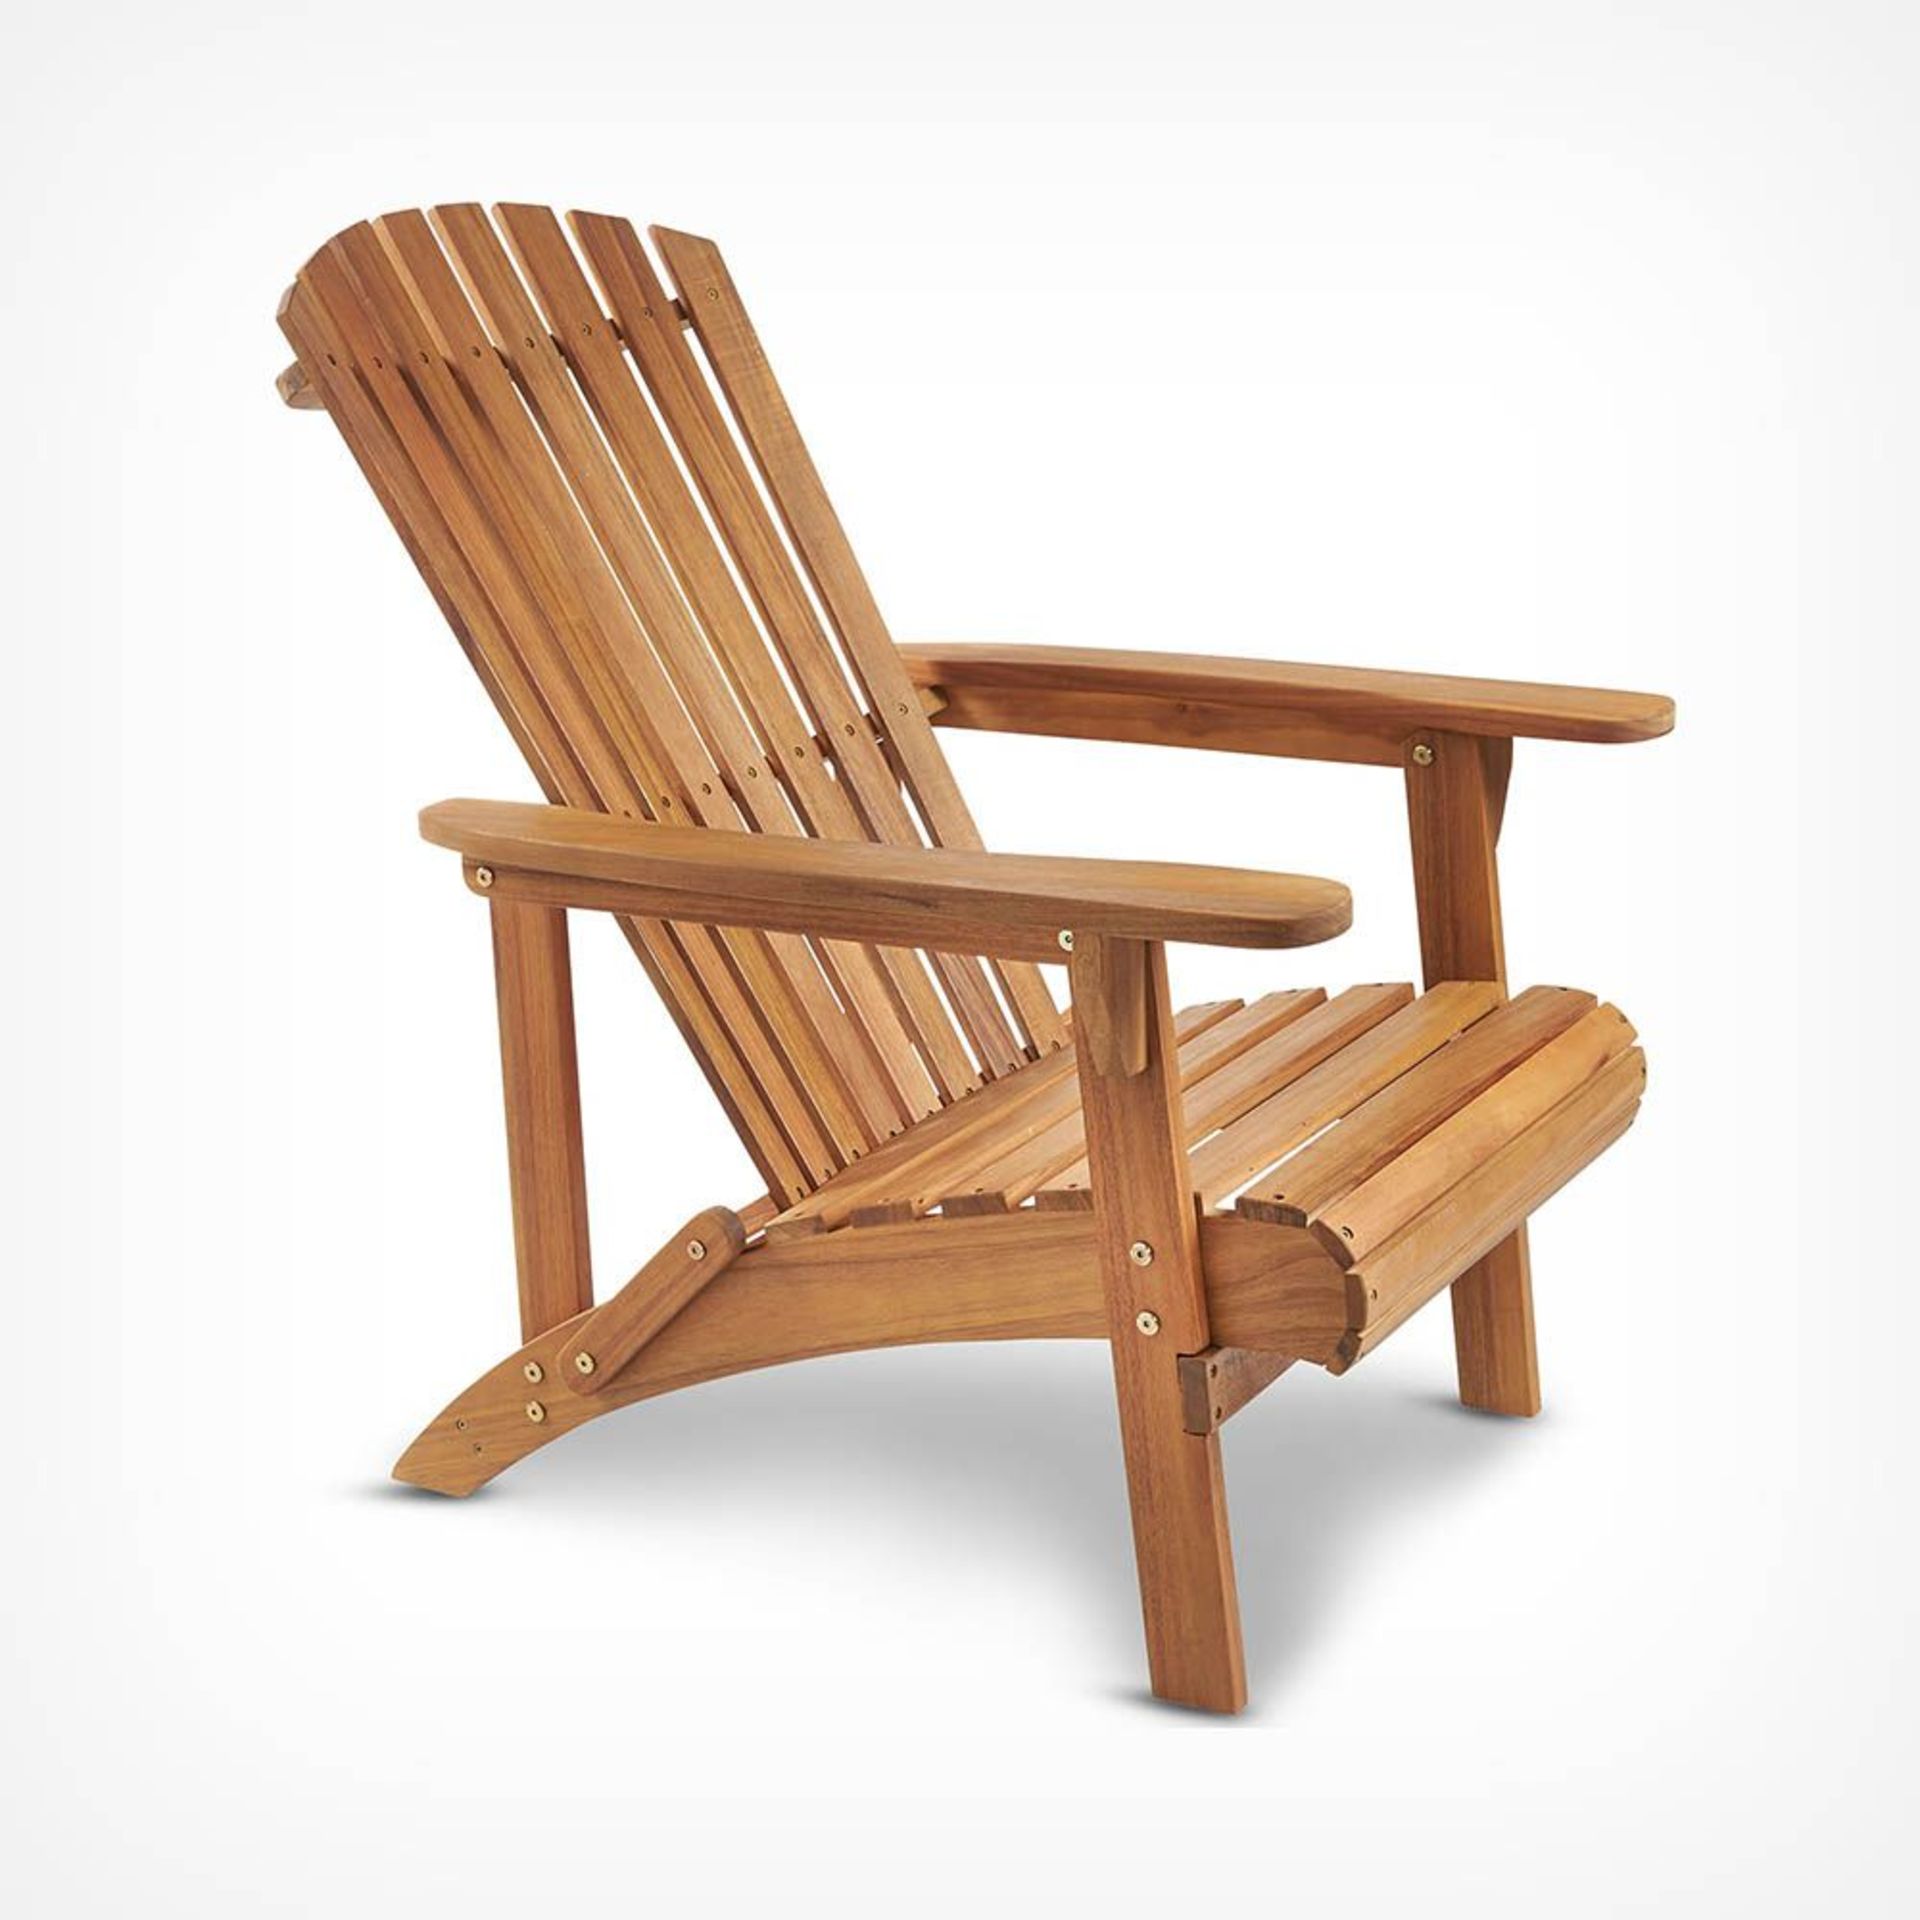 Adirondack Chair. - BI. Bask in the sun and unwind in style with our stunning Adirondack chair. This